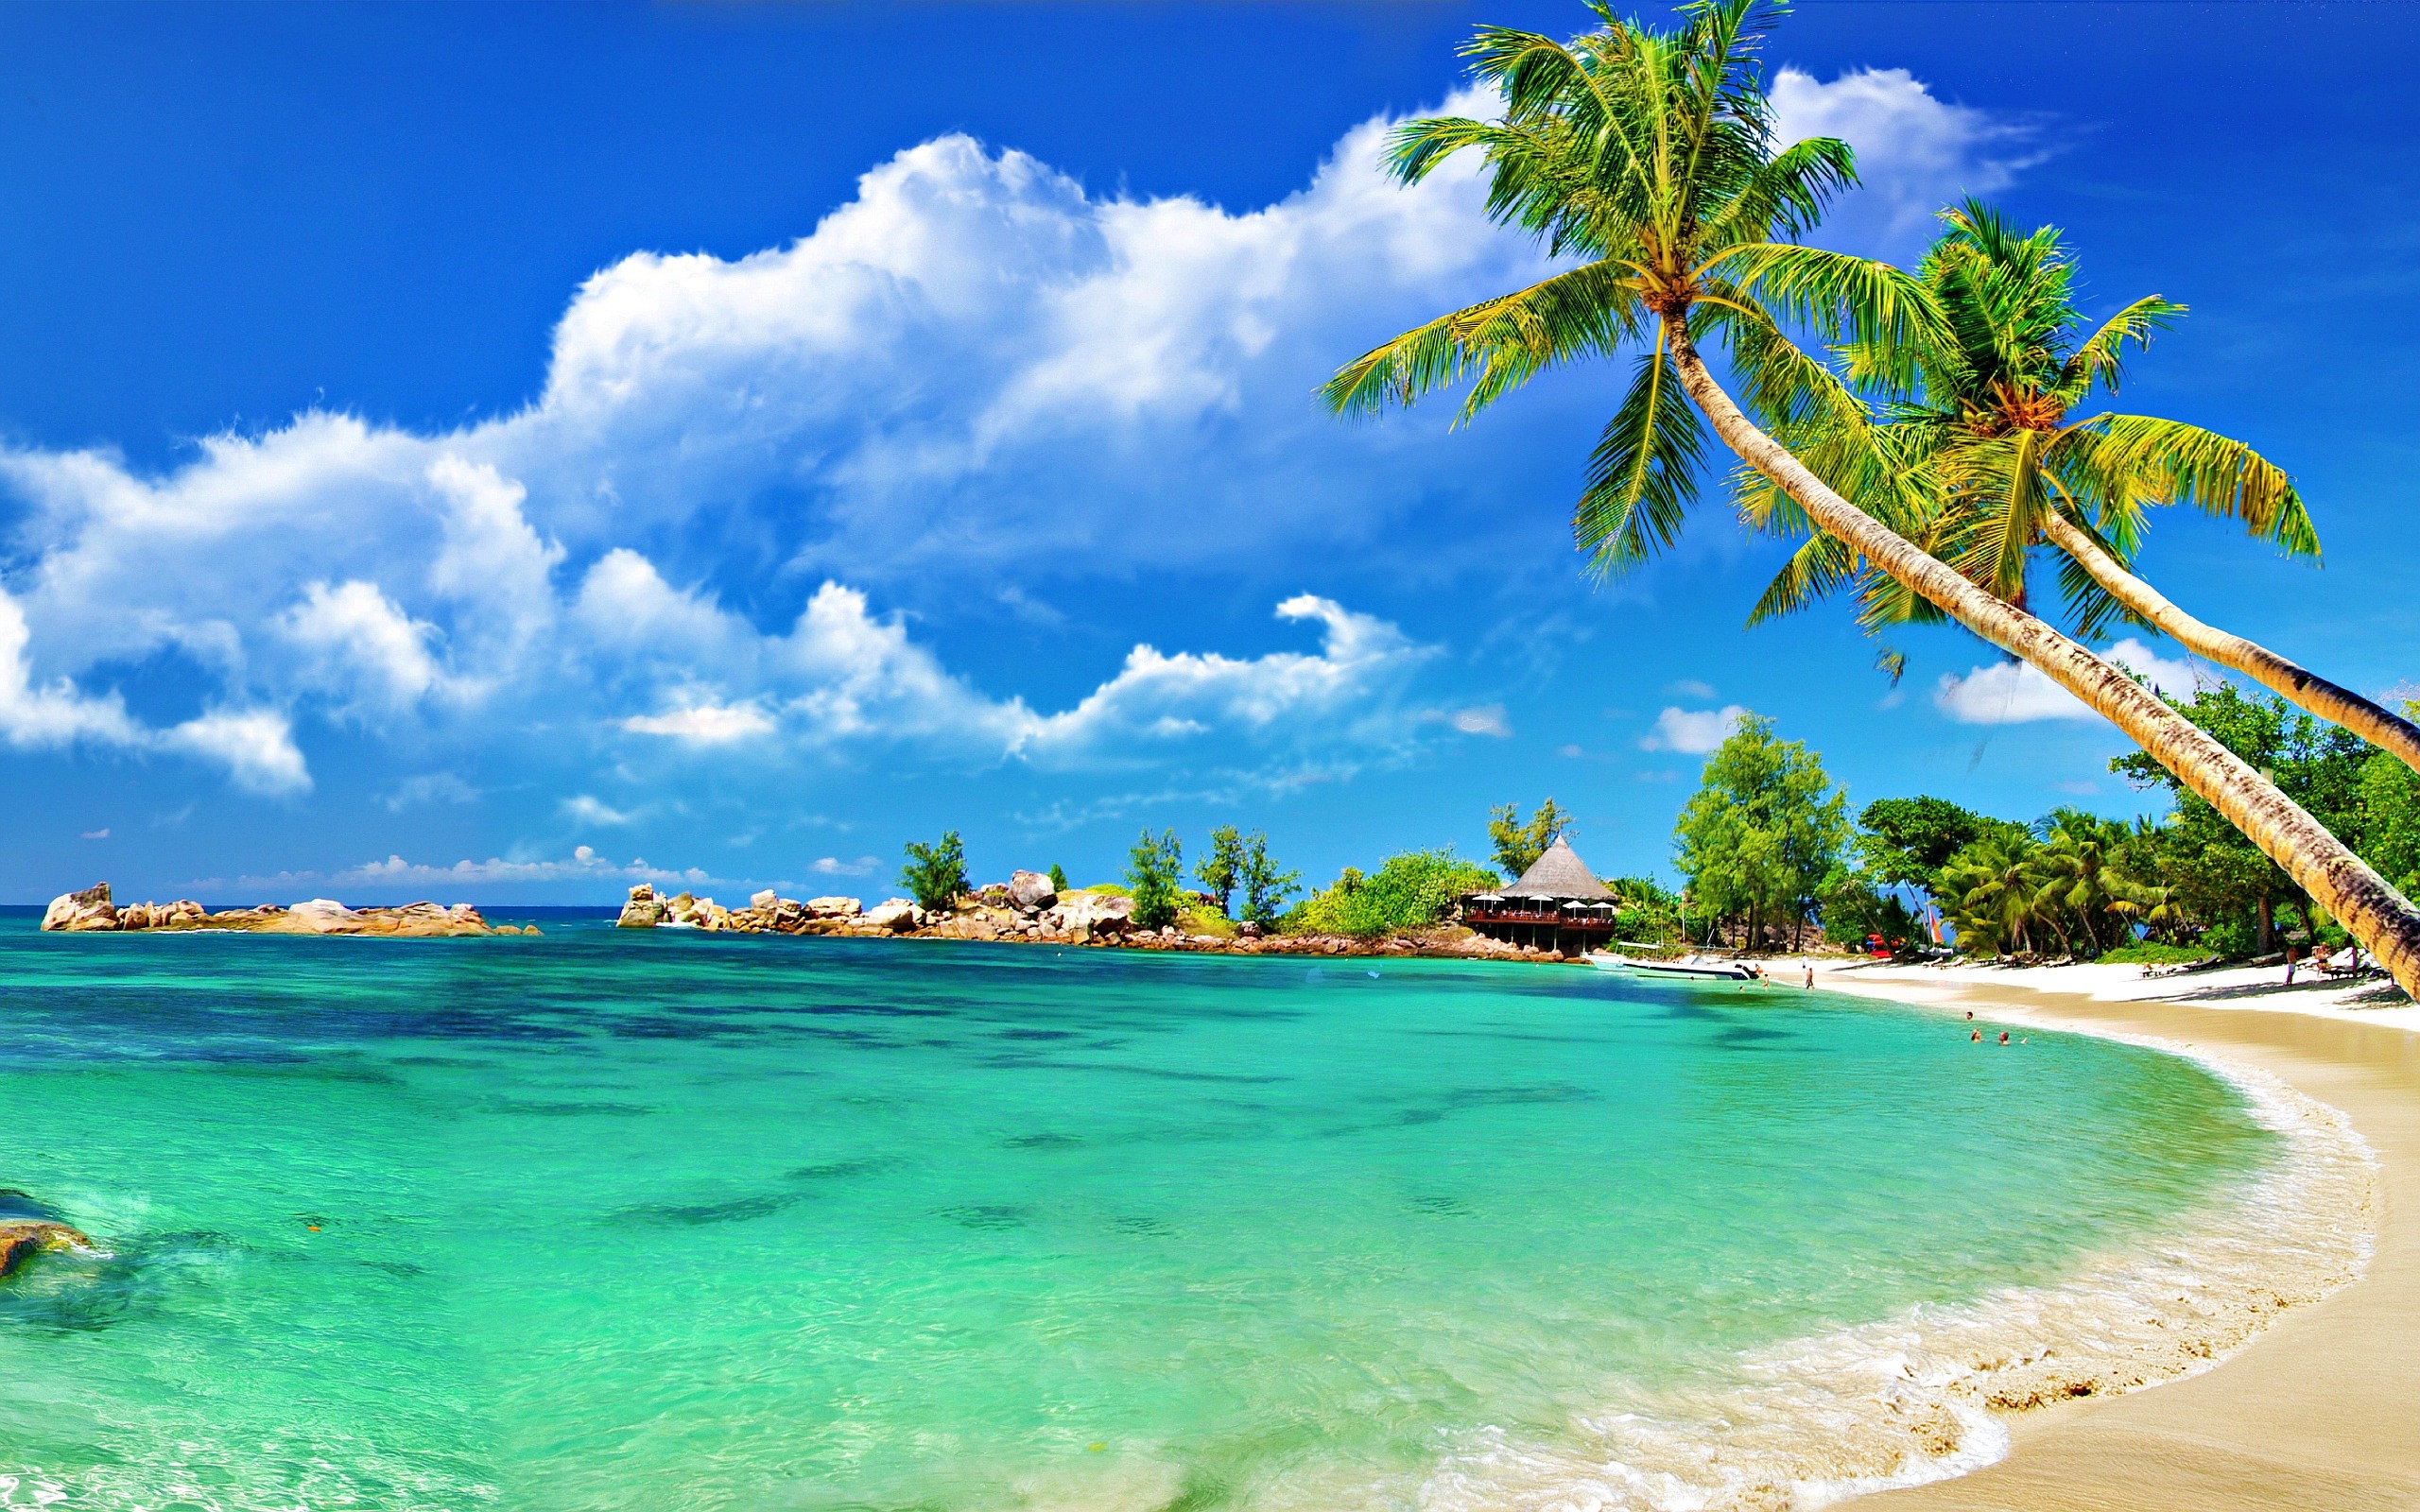 2560x1600 50 AMAZING BEACH WALLPAPERS FREE TO DOWNLOAD